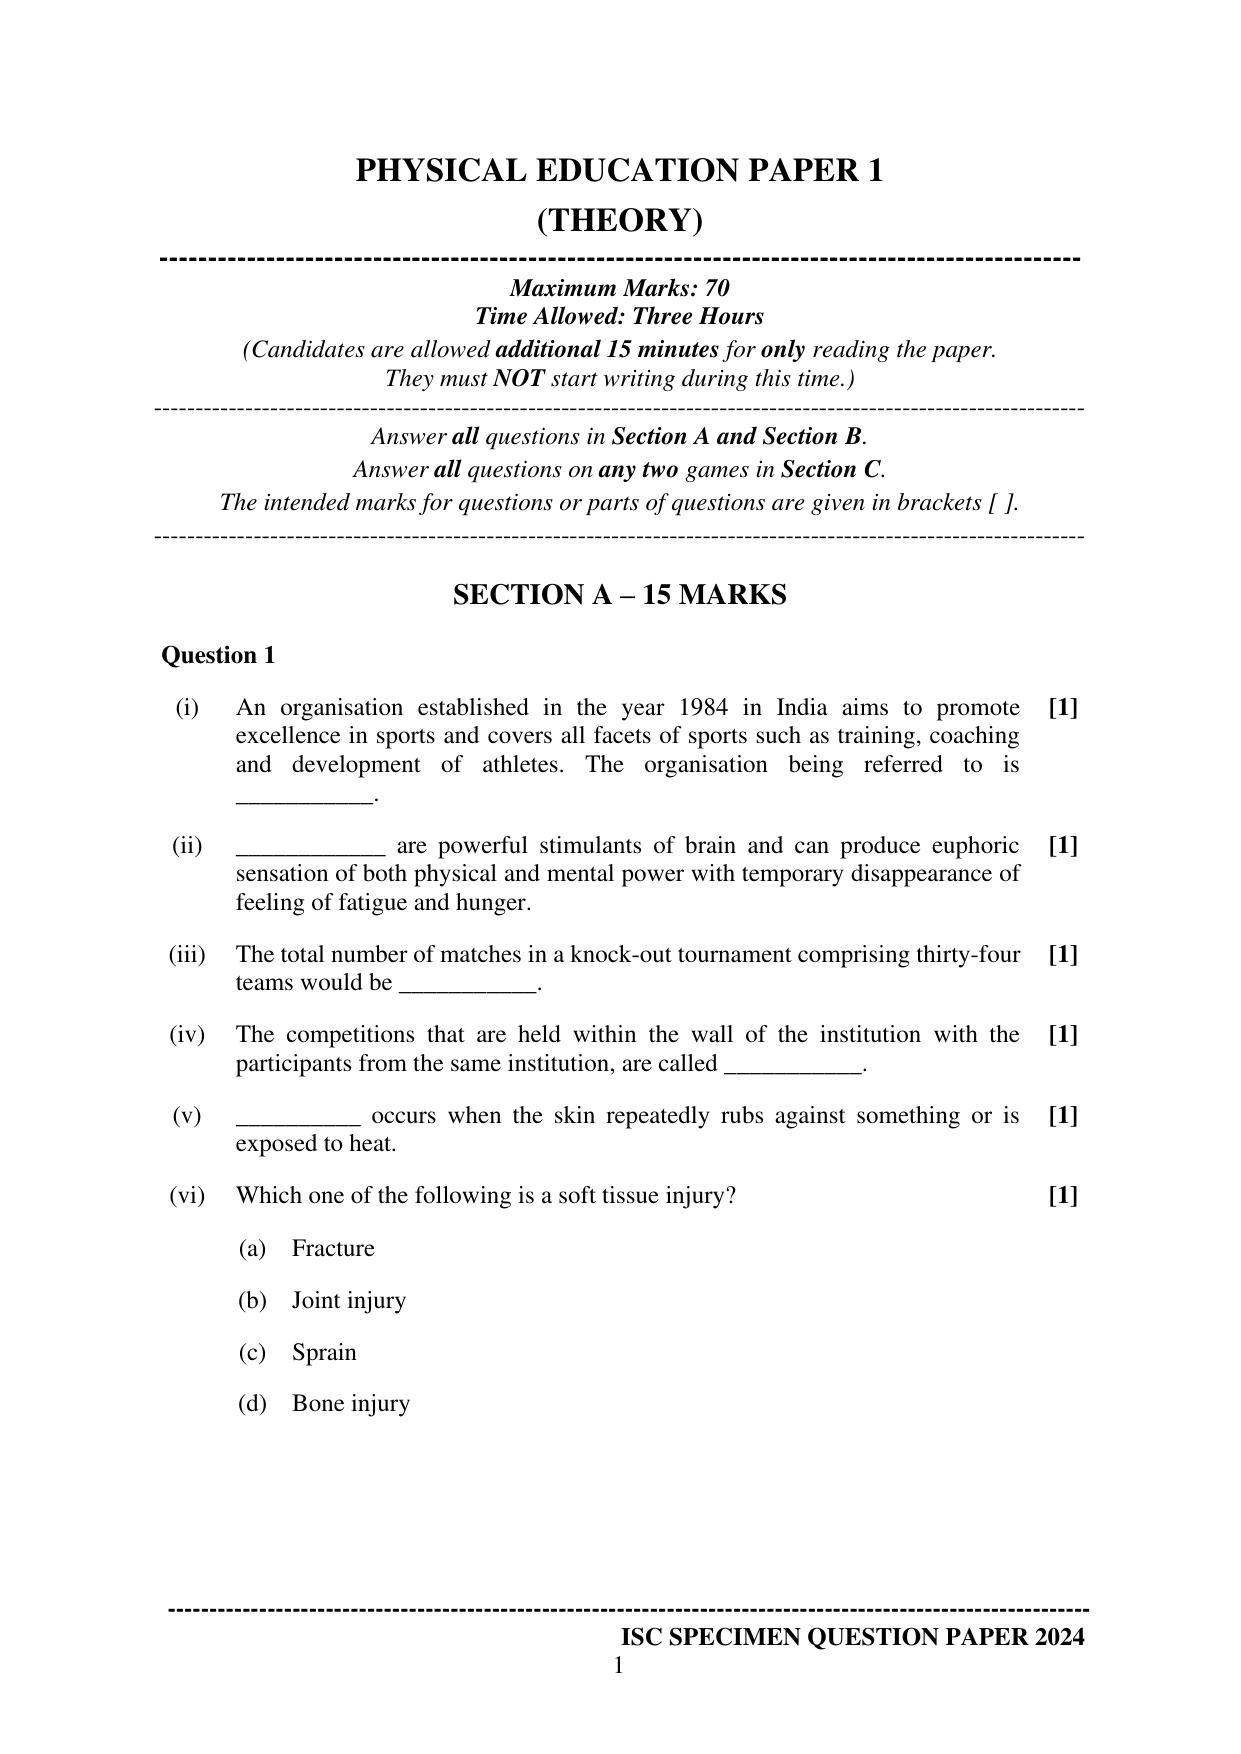 ISC Class 12 2024 Physical Education Sample Paper - Page 1